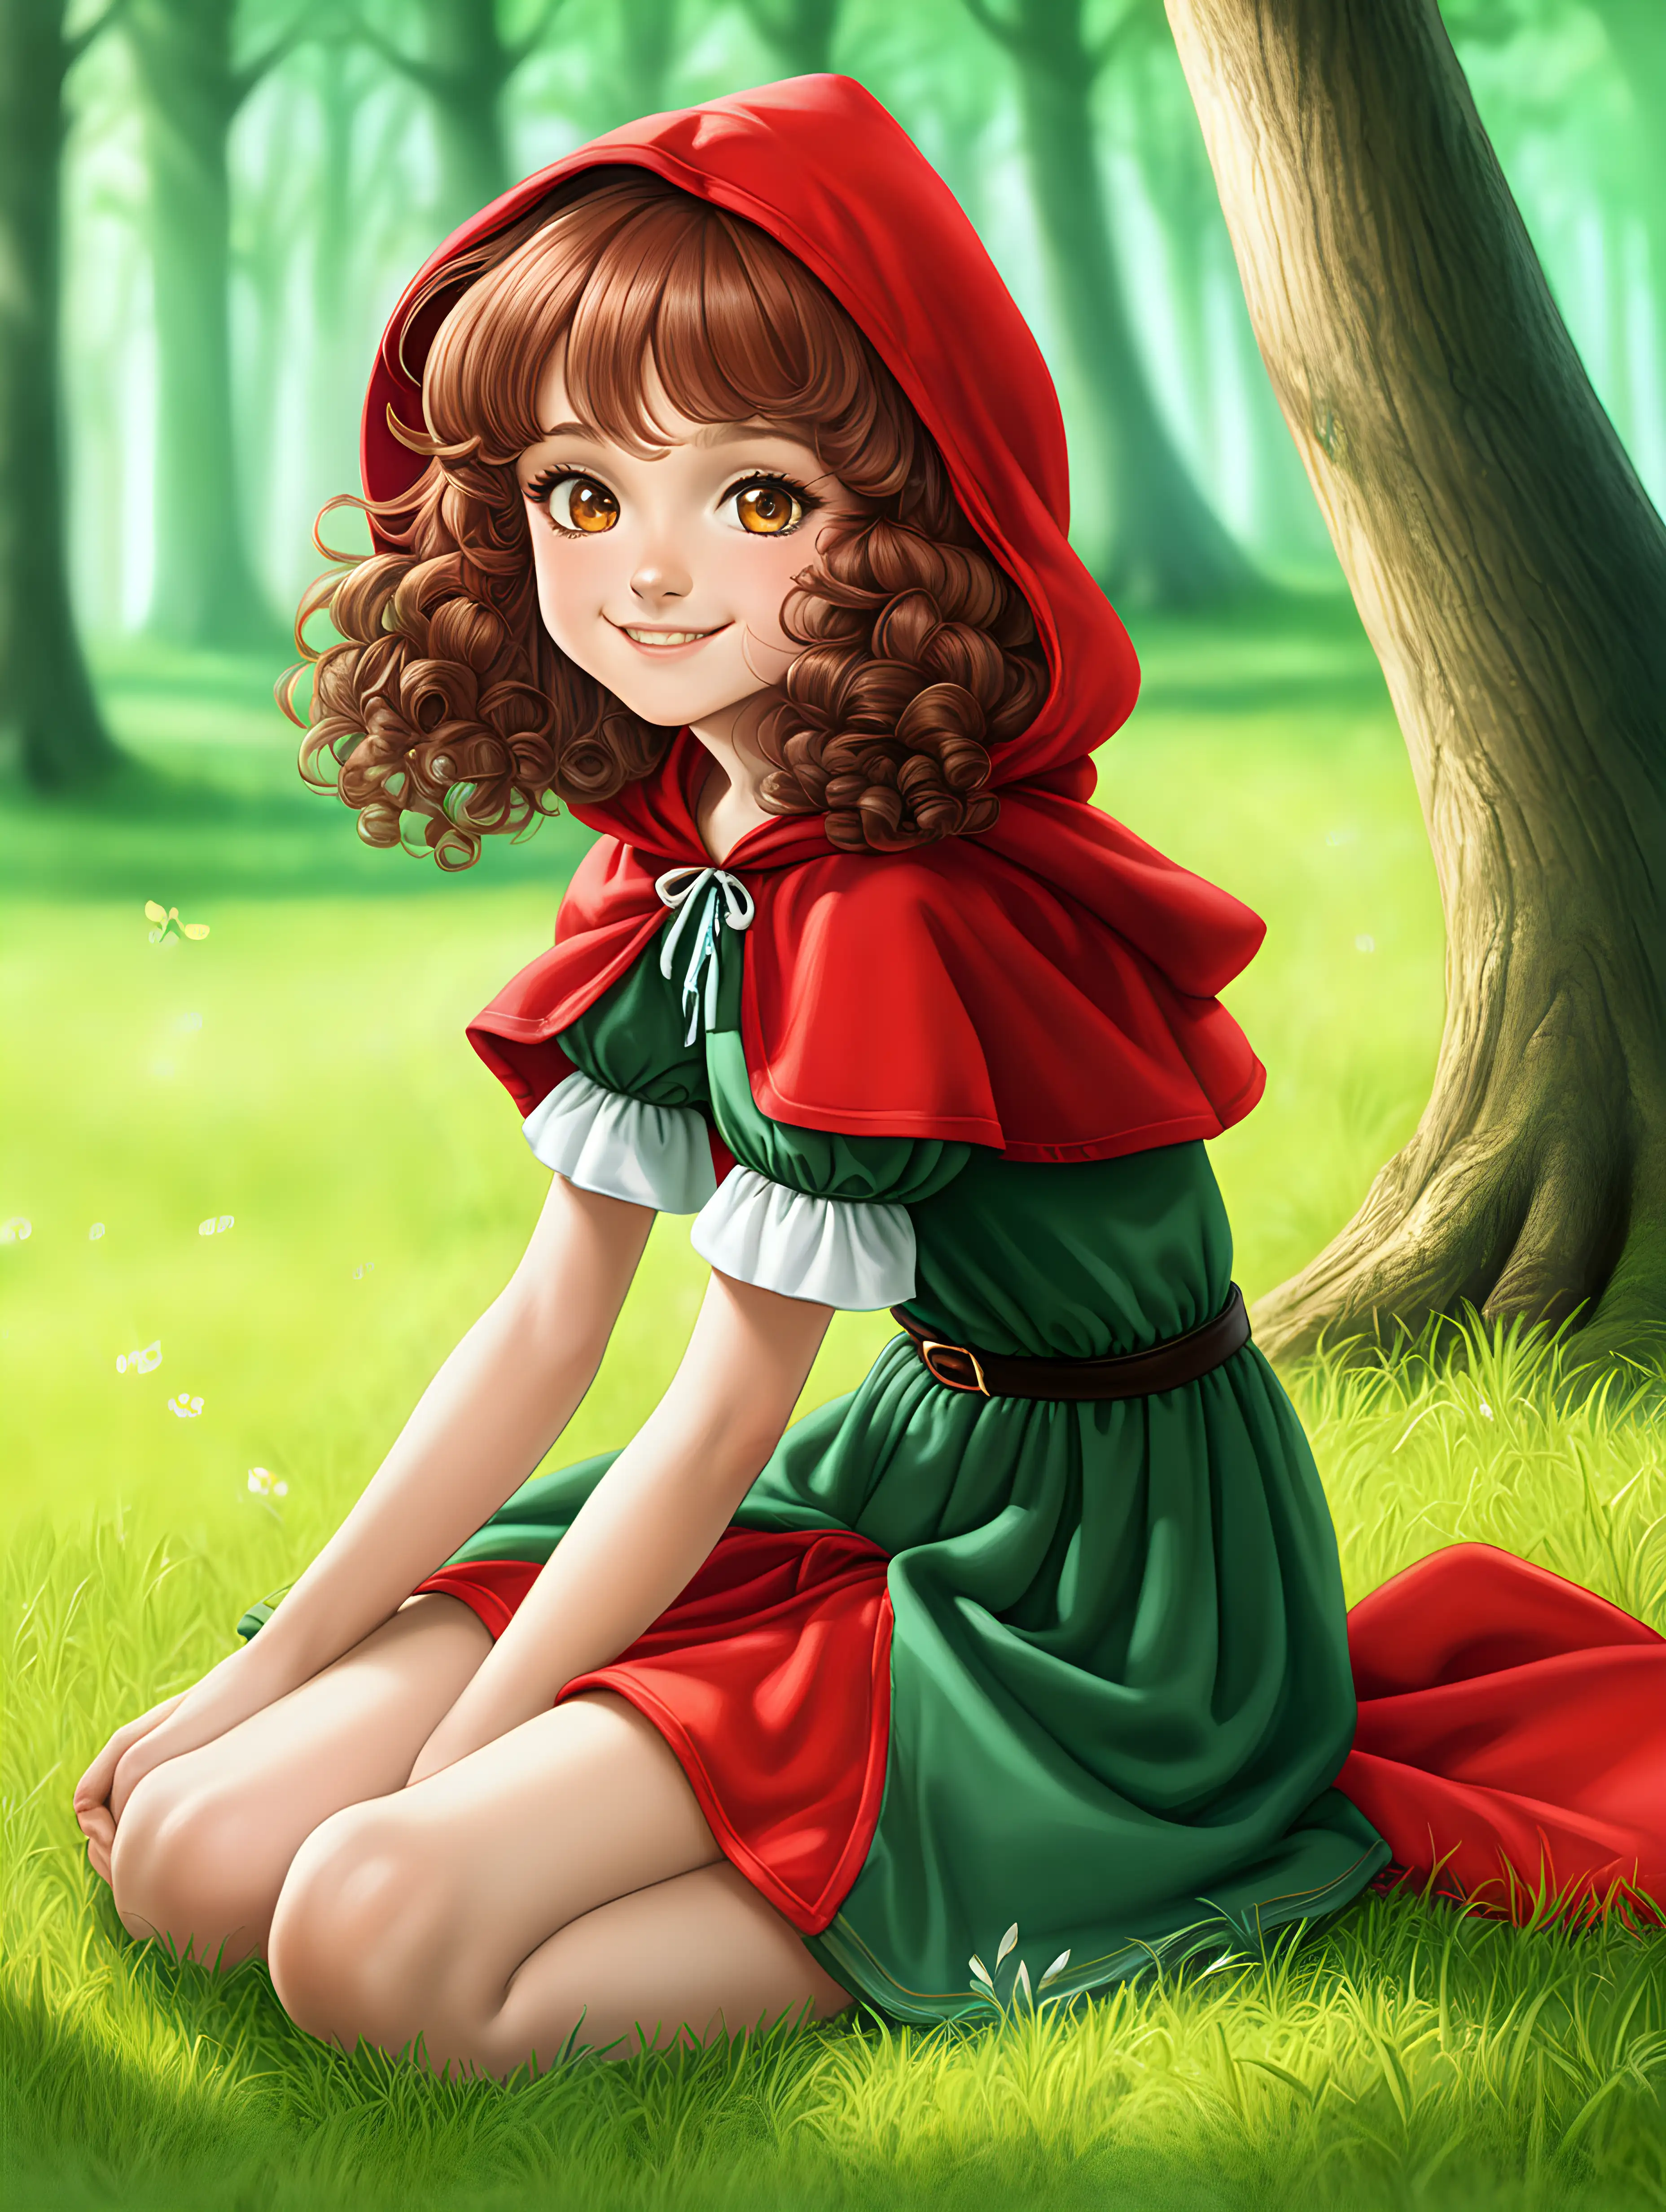 There is a forest with sunlinght shining among the trees, Red riding hood is sitting on the grass with sweet smiling eyes, she is 13 years old, she is cute,  feet on the grass, green dress, Brown curly hair, full body